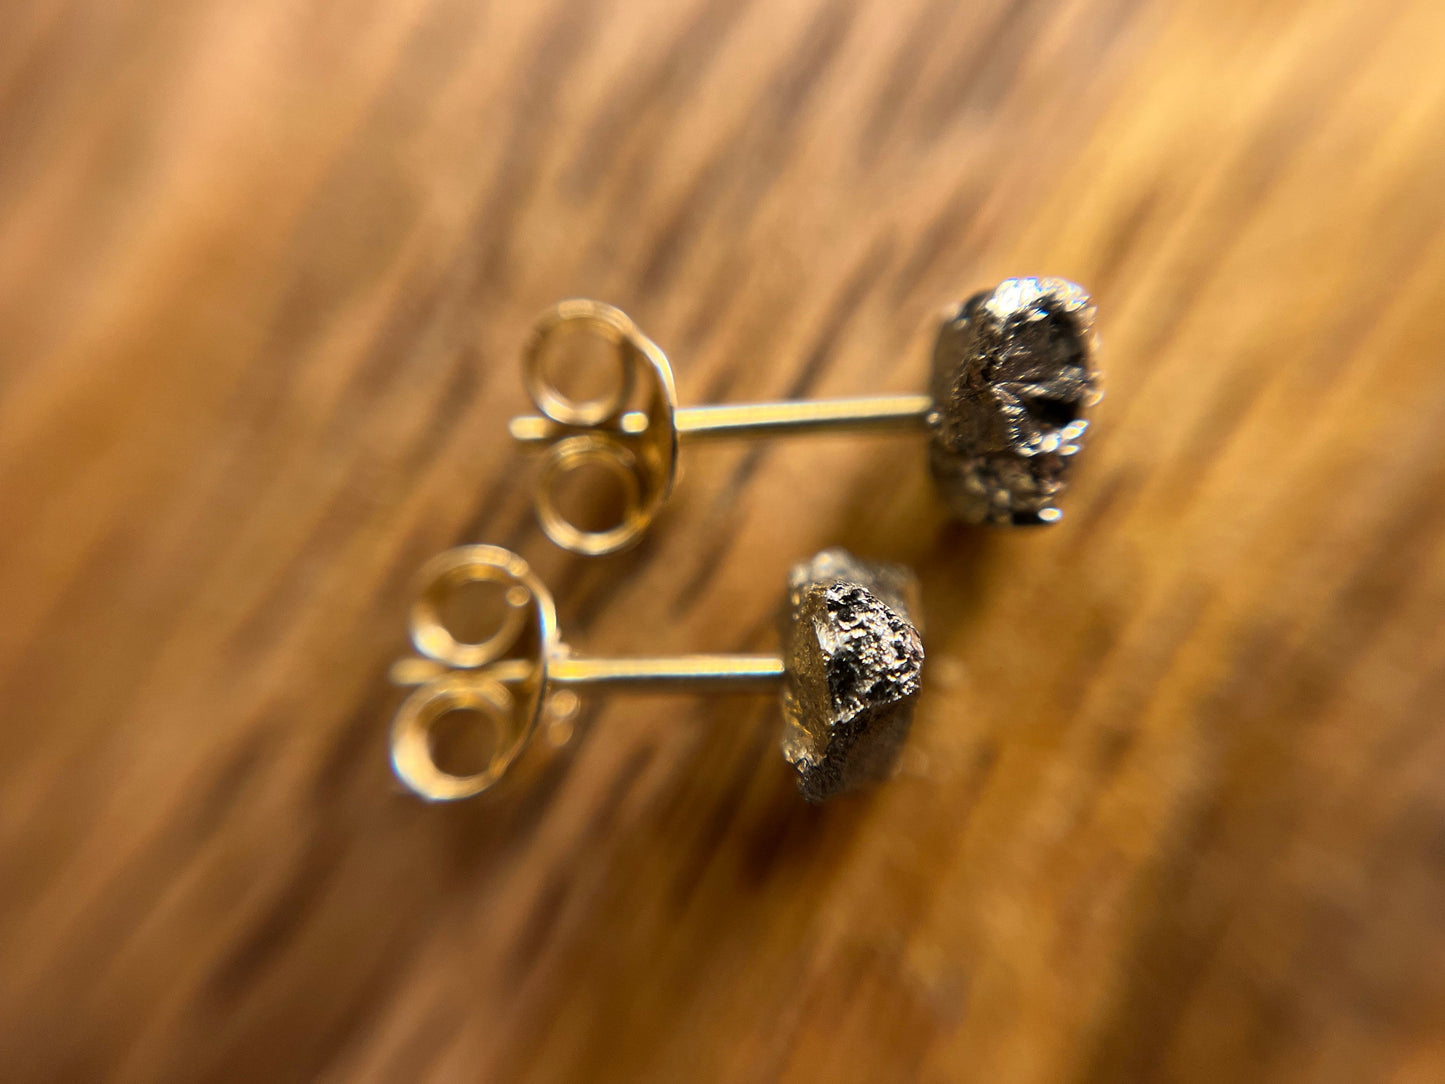 9ct or 18ct Gold Pyrite Stud Earrings, Natural Pyrite Earrings, Raw Crystal Earrings, Raw Pyrite Jewellery, Minimalist Earring Studs